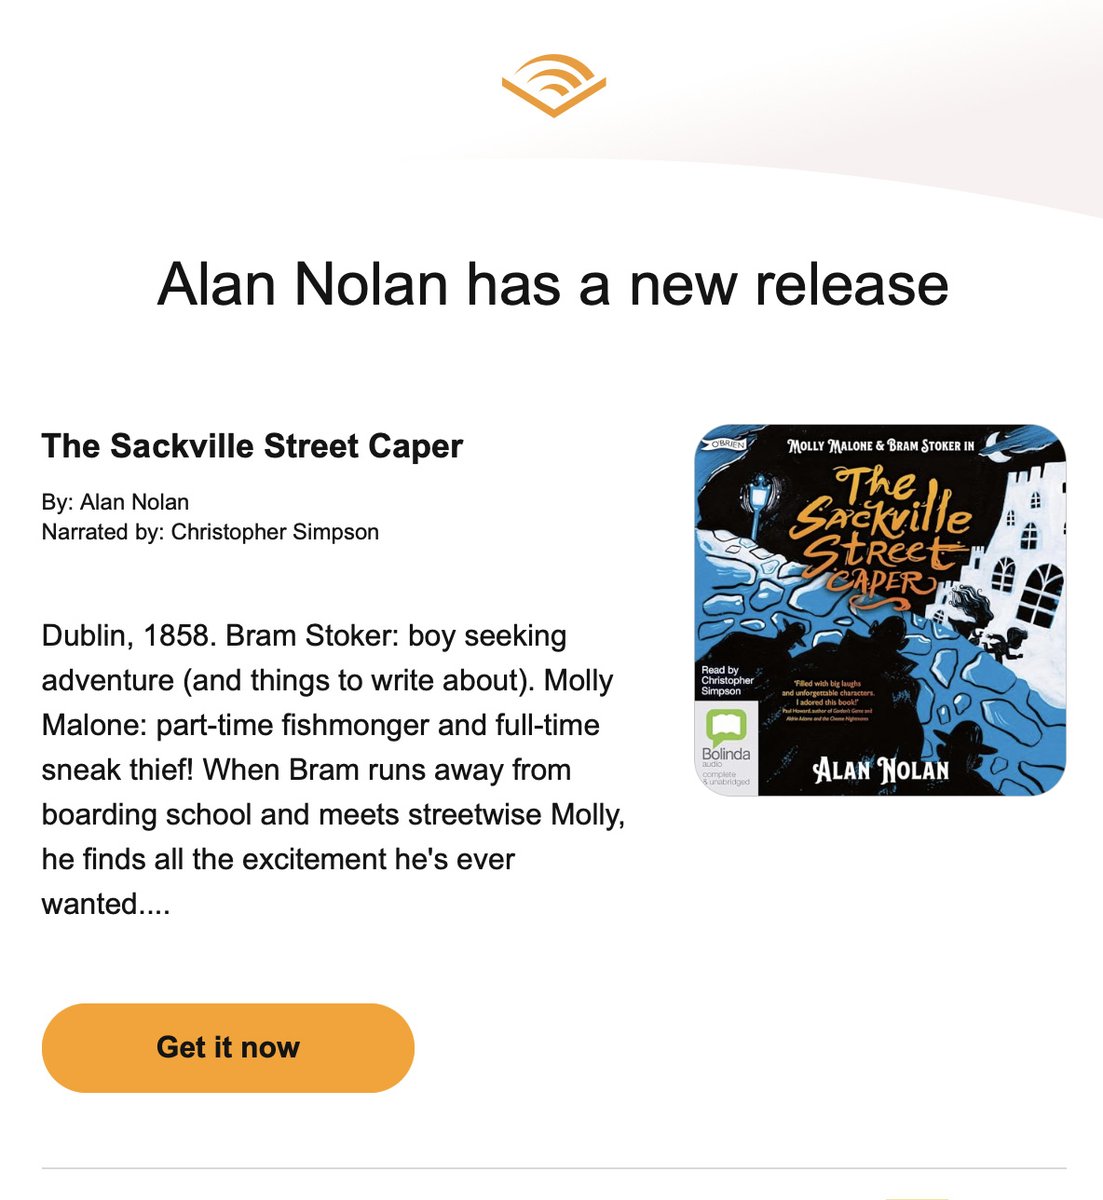 Just realised that ‘The Sackville Street Caper’ is NOW AVAILABLE as an audiobook! You can get it from your favourite audiobook apps and from @BorrowBox - just the ticket for the forgetful gift-giver on the day *after* Valentine’s Day. @Bolindaaudio @OBrienPress @cluskeydraws